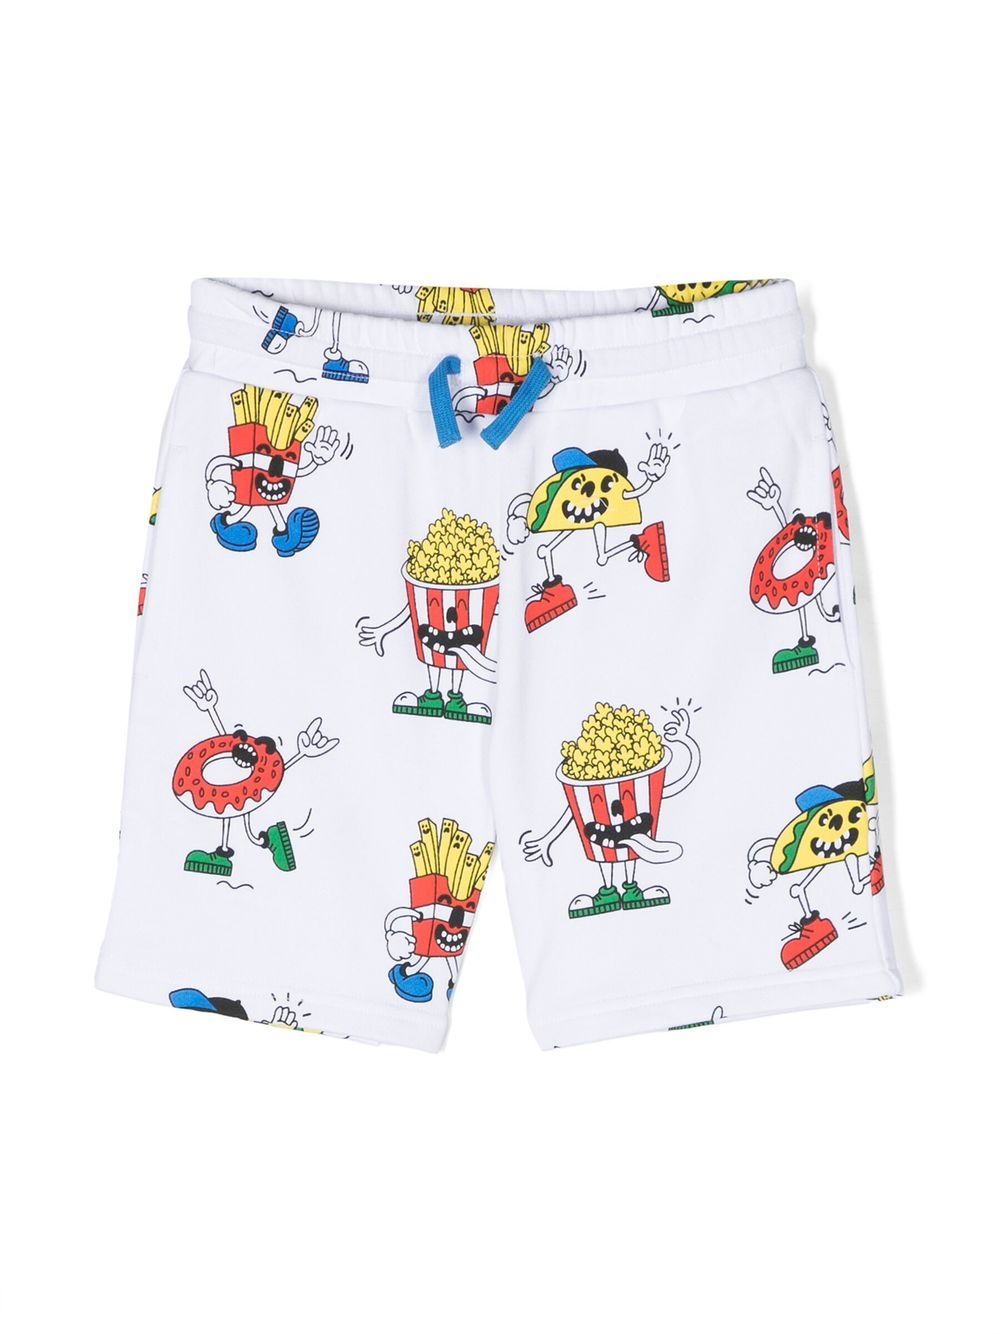 White Bermuda shorts for boys with print